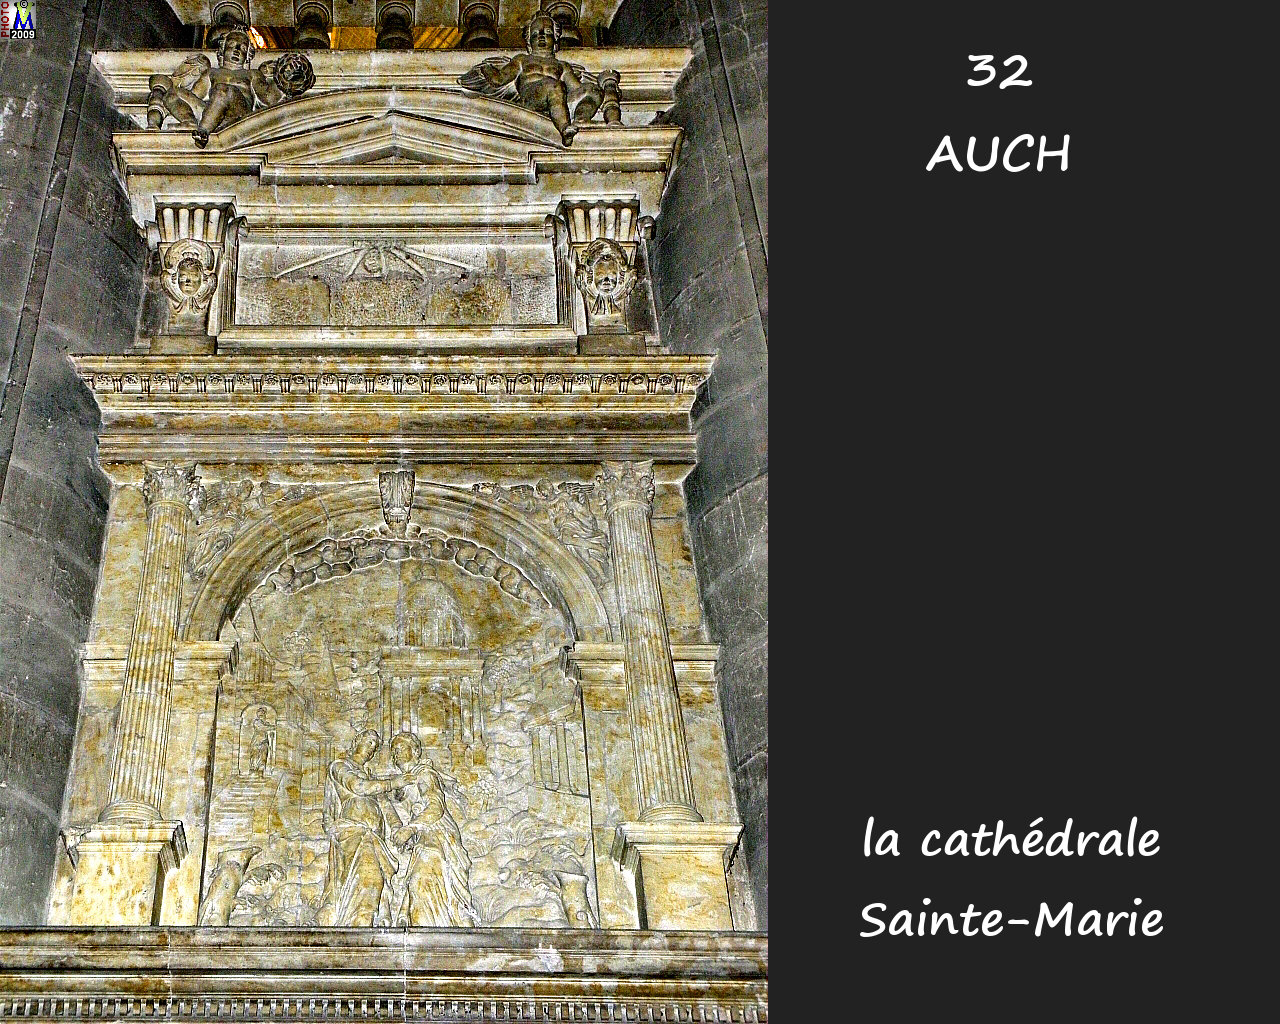 32AUCH_cathedrale_234.jpg